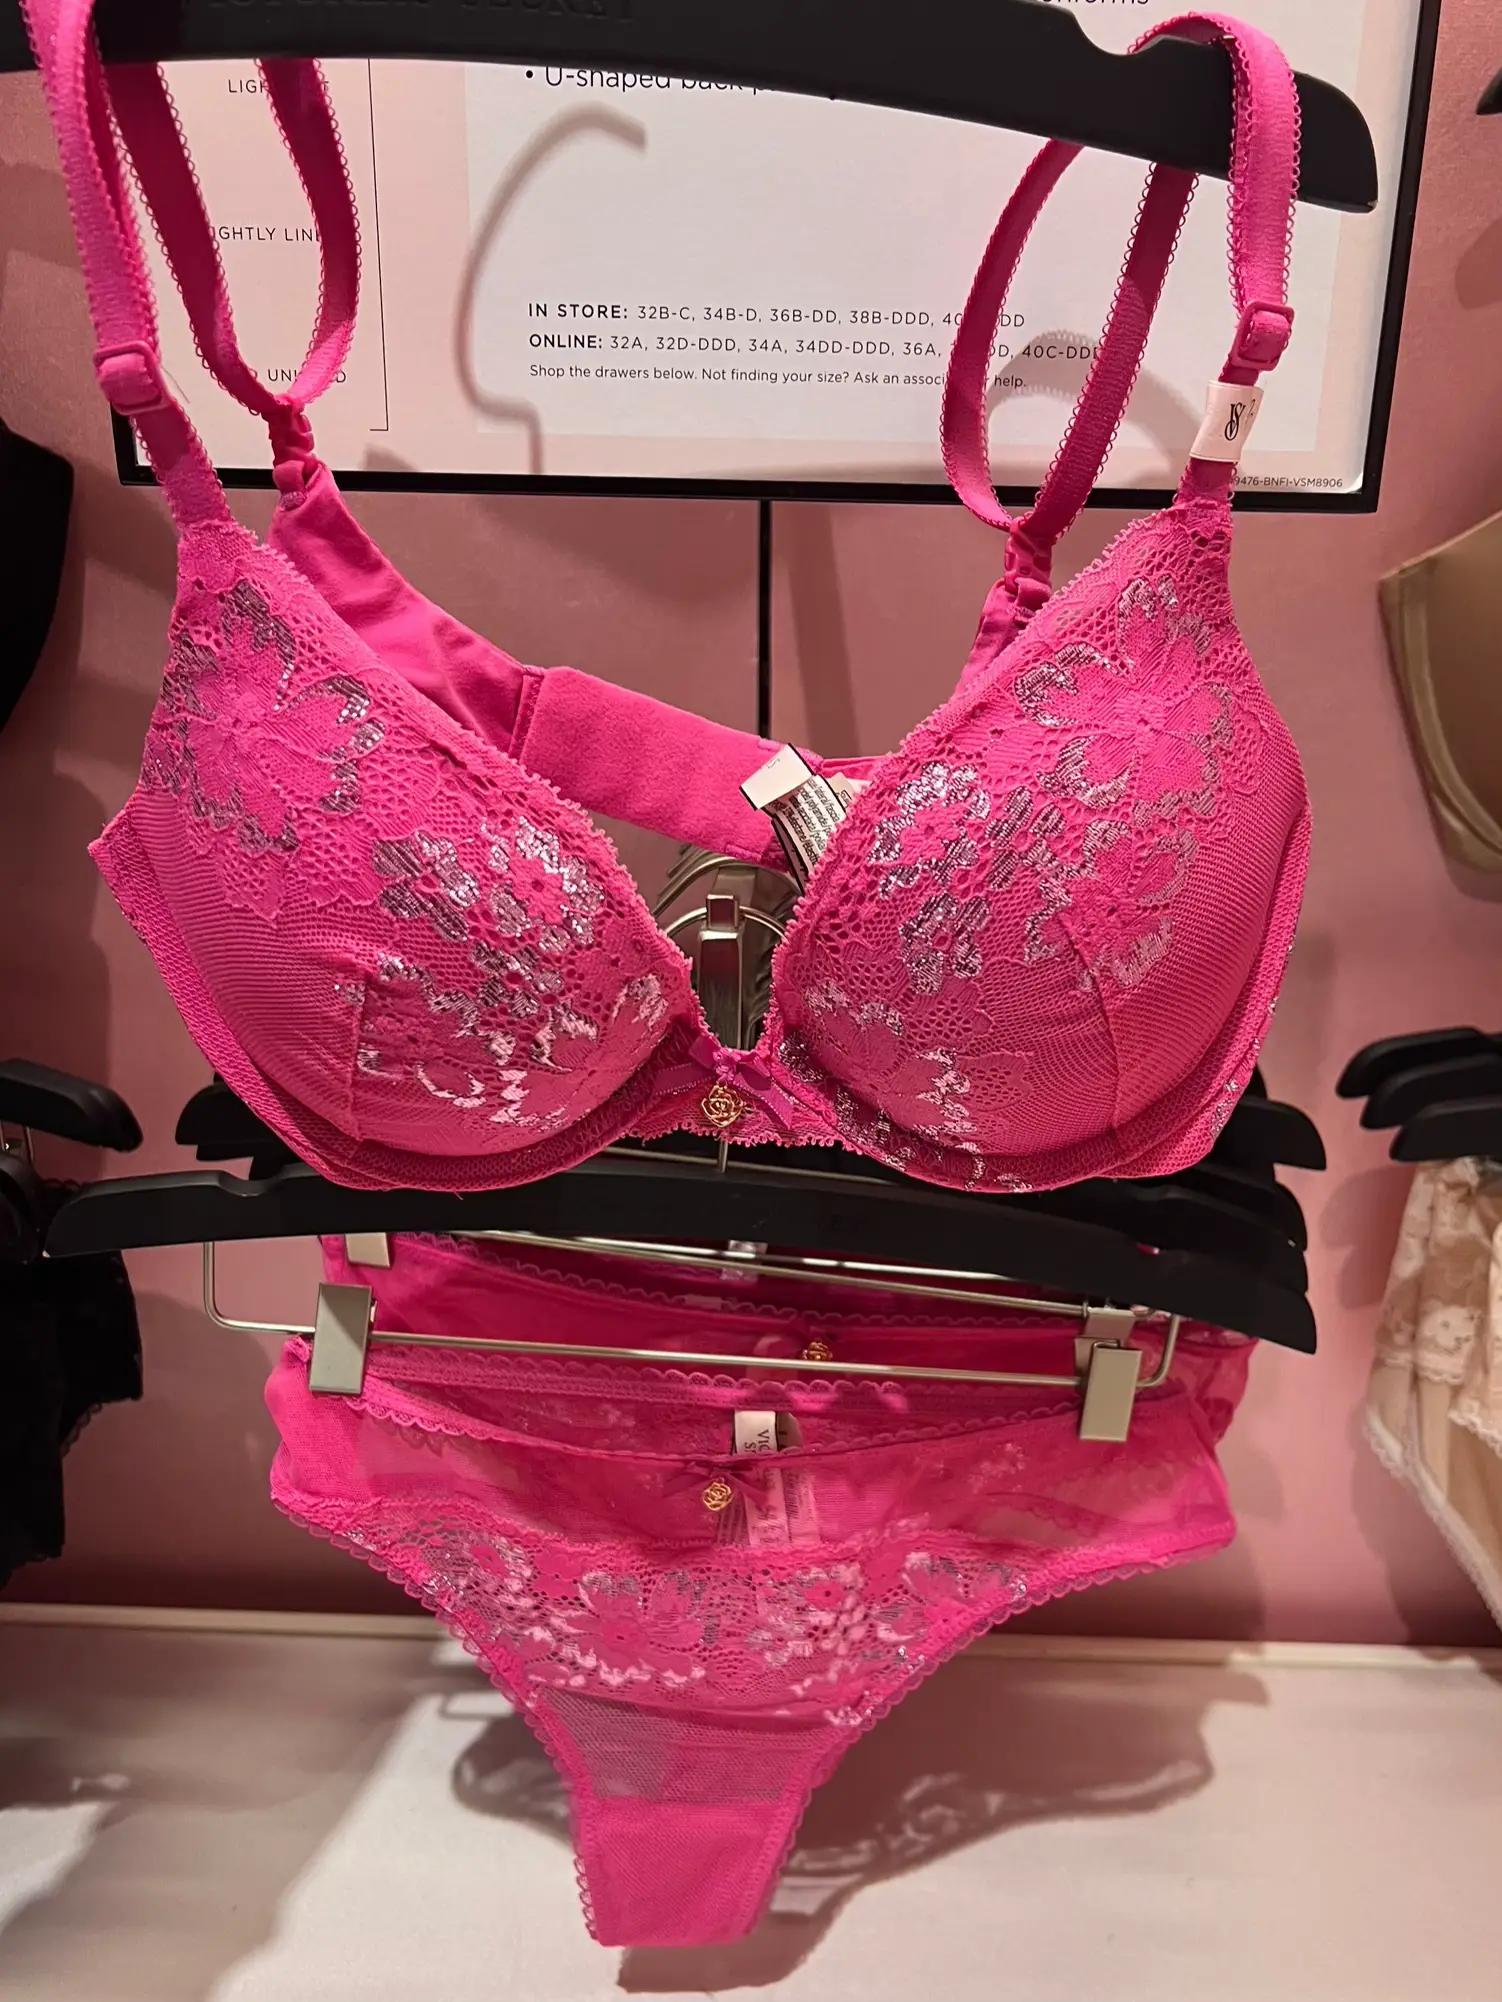 4 Victoria Secret PINK Bras Size 32A for Sale in Riverside County